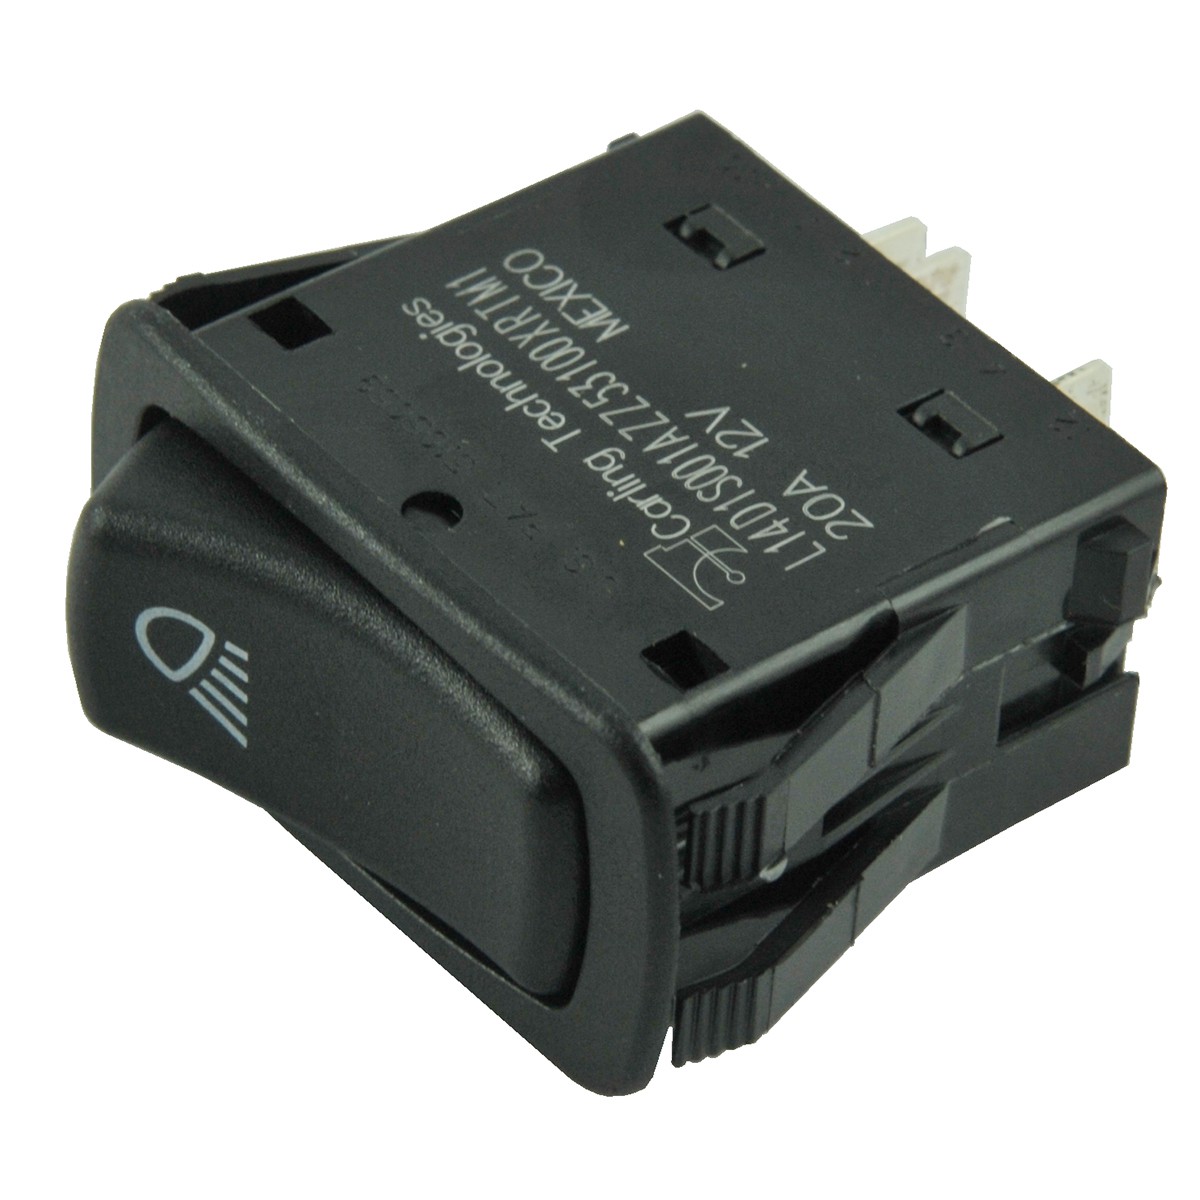 Pulse lamp switch / LS MT1.25 / LS MT3.35 / LS MT3.40 / LS MT3.50 / LS MT3.60 / TRG750 / 40308094